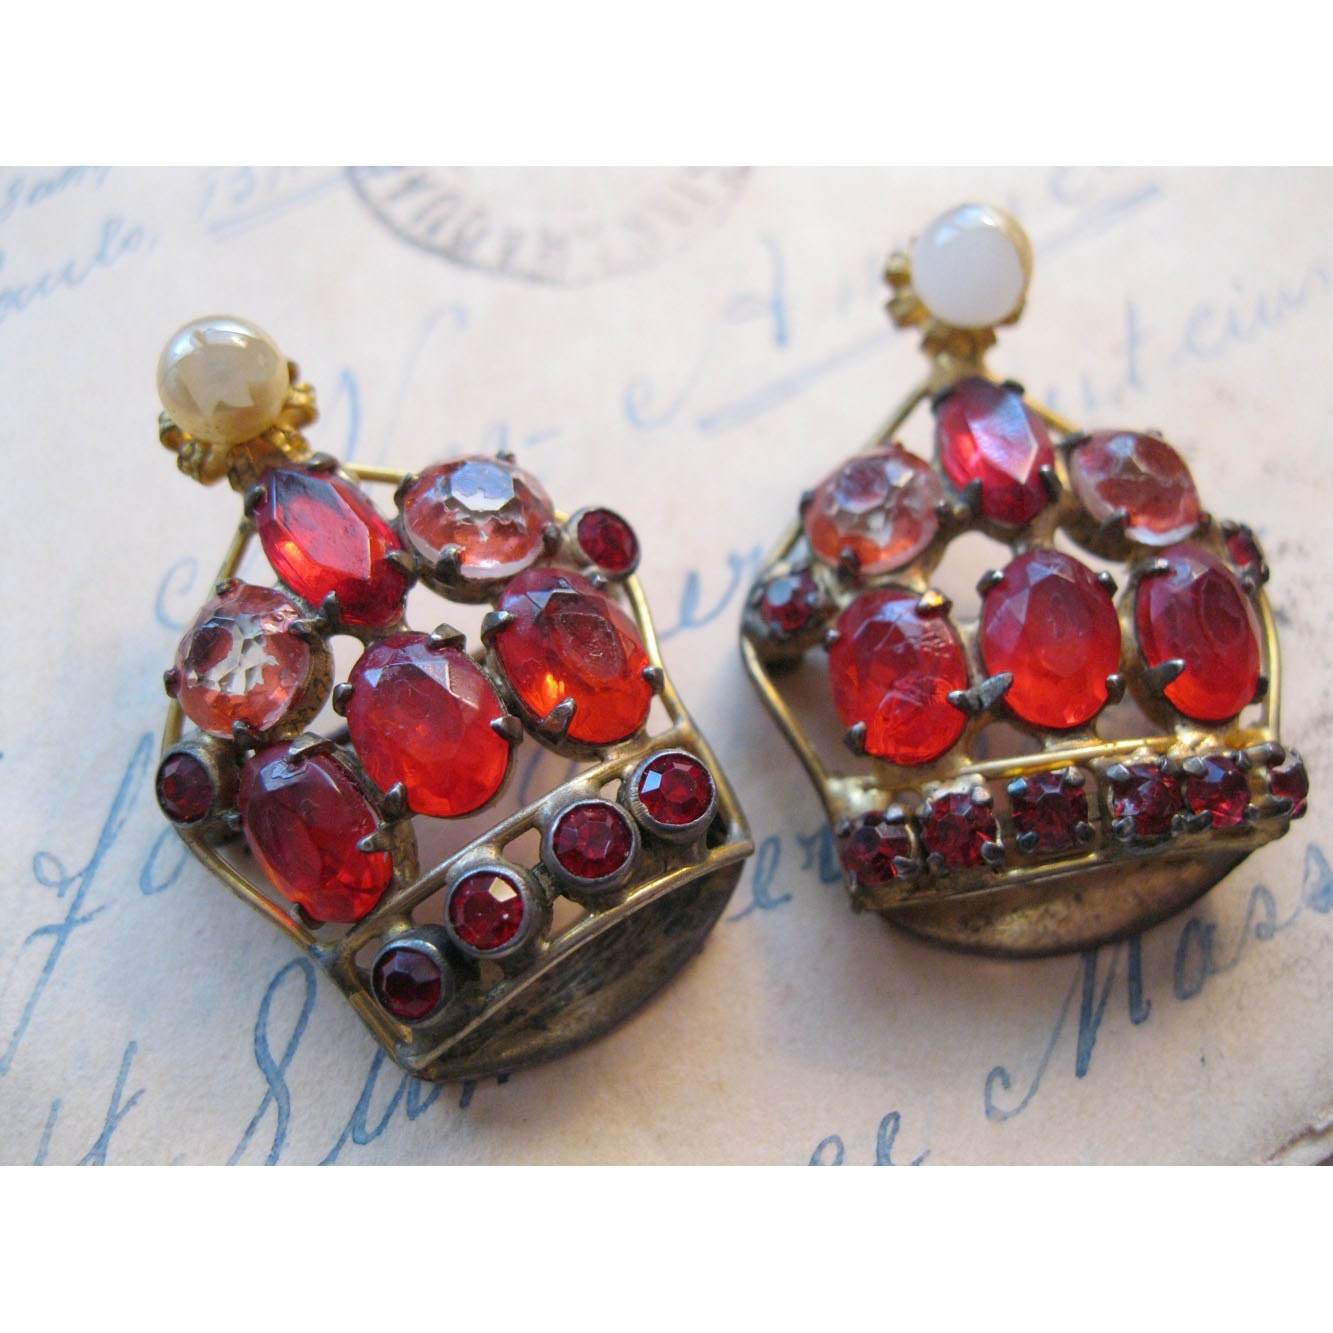 SALE - 2 vintage CROWN brooches - a FABULOUS pair - red stones, each slightly different, so unique